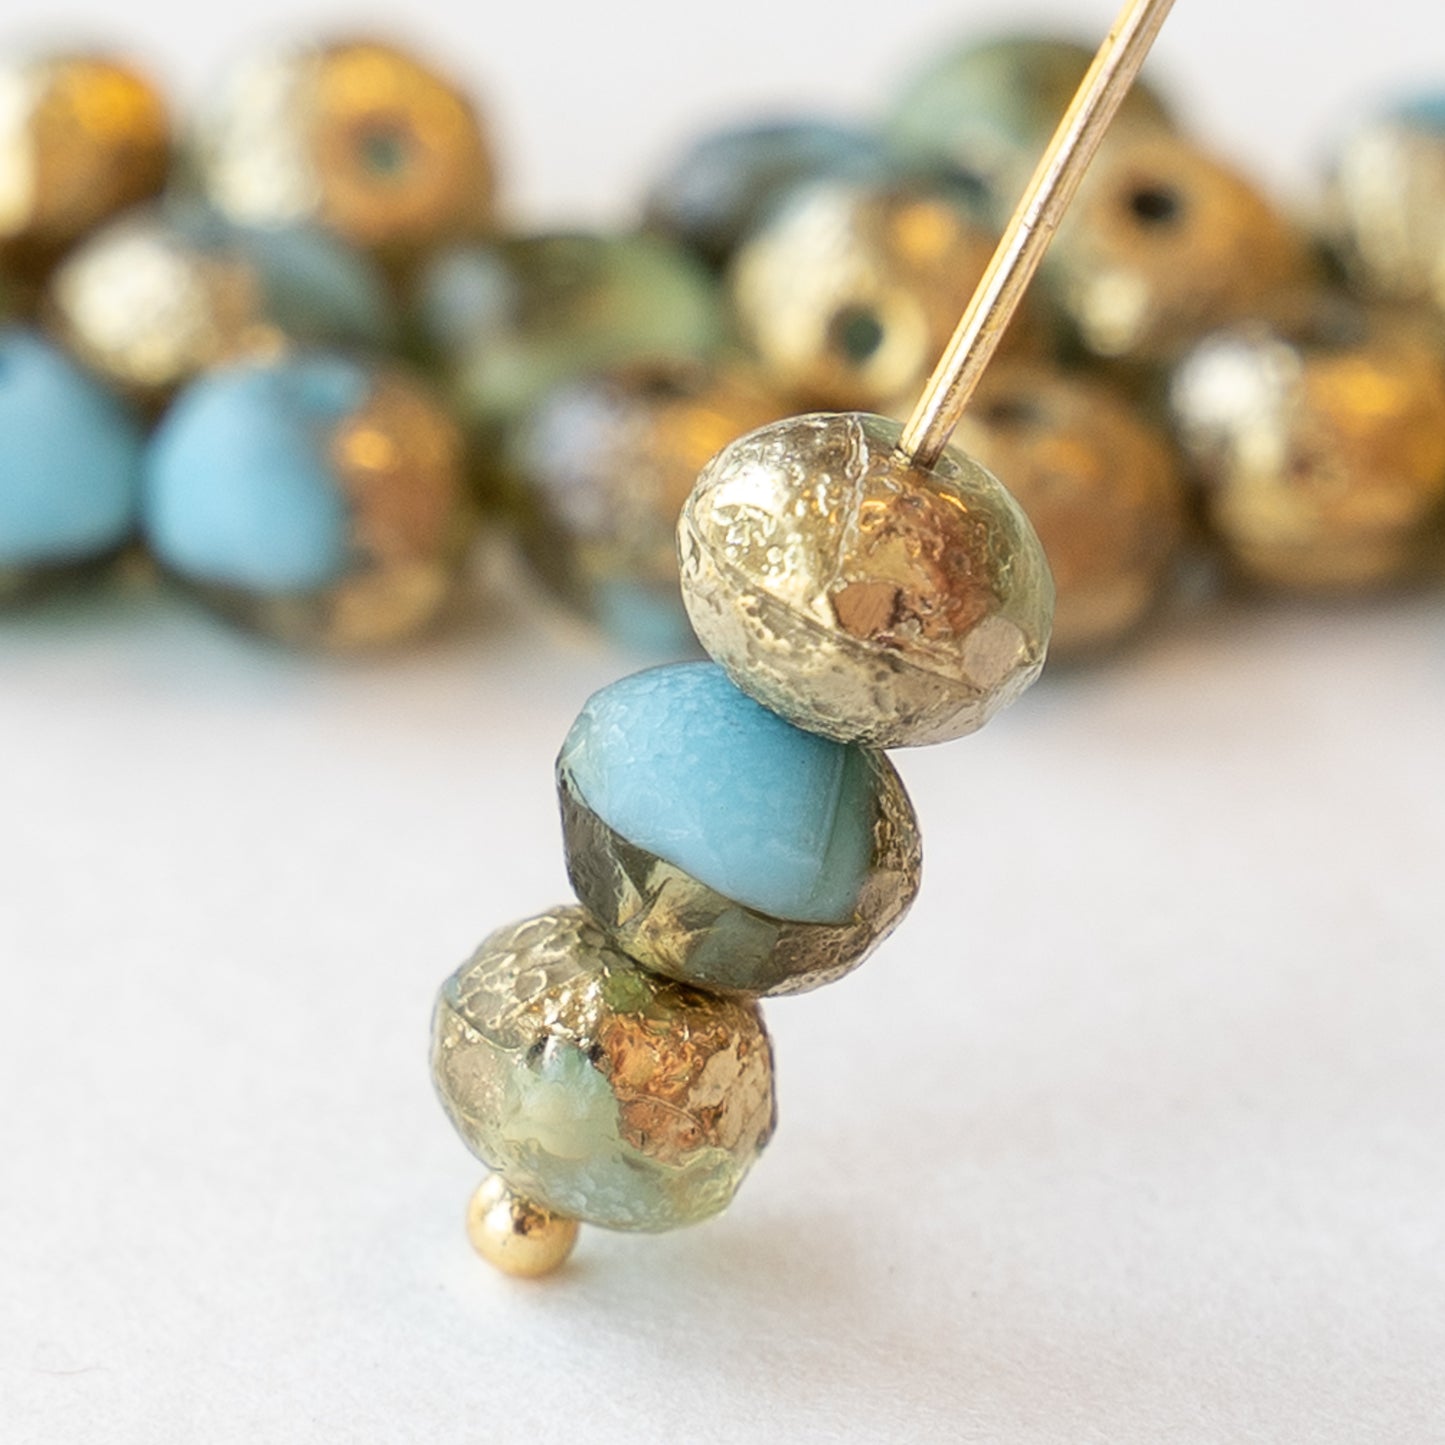 Load image into Gallery viewer, 5x7mm Rondelle Beads - Blue with Gold Etched Finish - 25 beads
